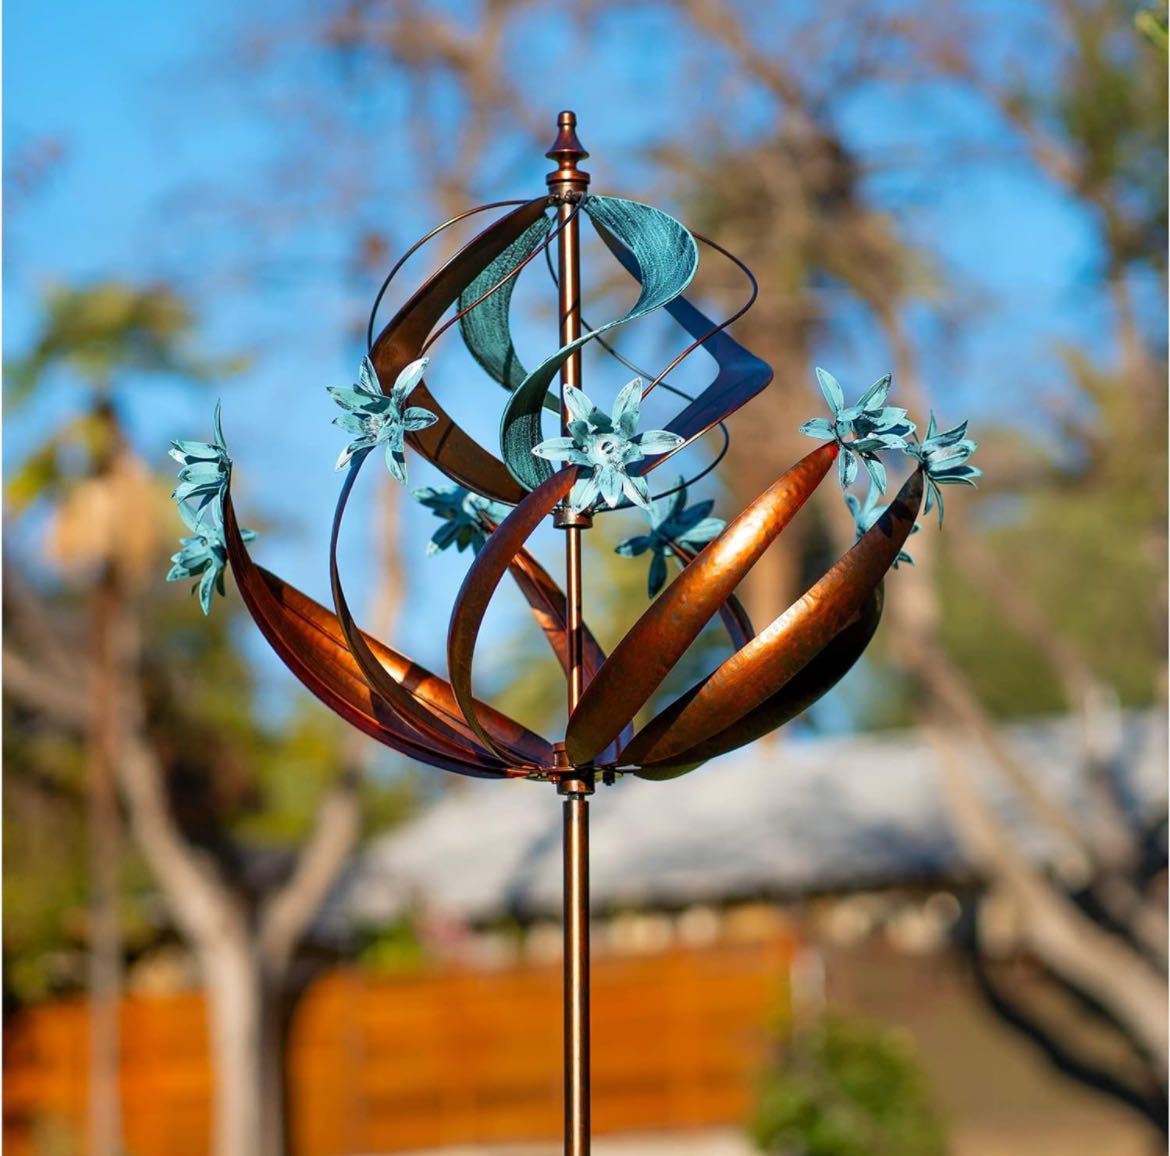 Outdoor Metal Wind Spinner for Yard Garden - Large Kinetic Wind Sculptures Spinners Outdoor Decoration, Gift for Birthday, Anniversary, Housewarming, 